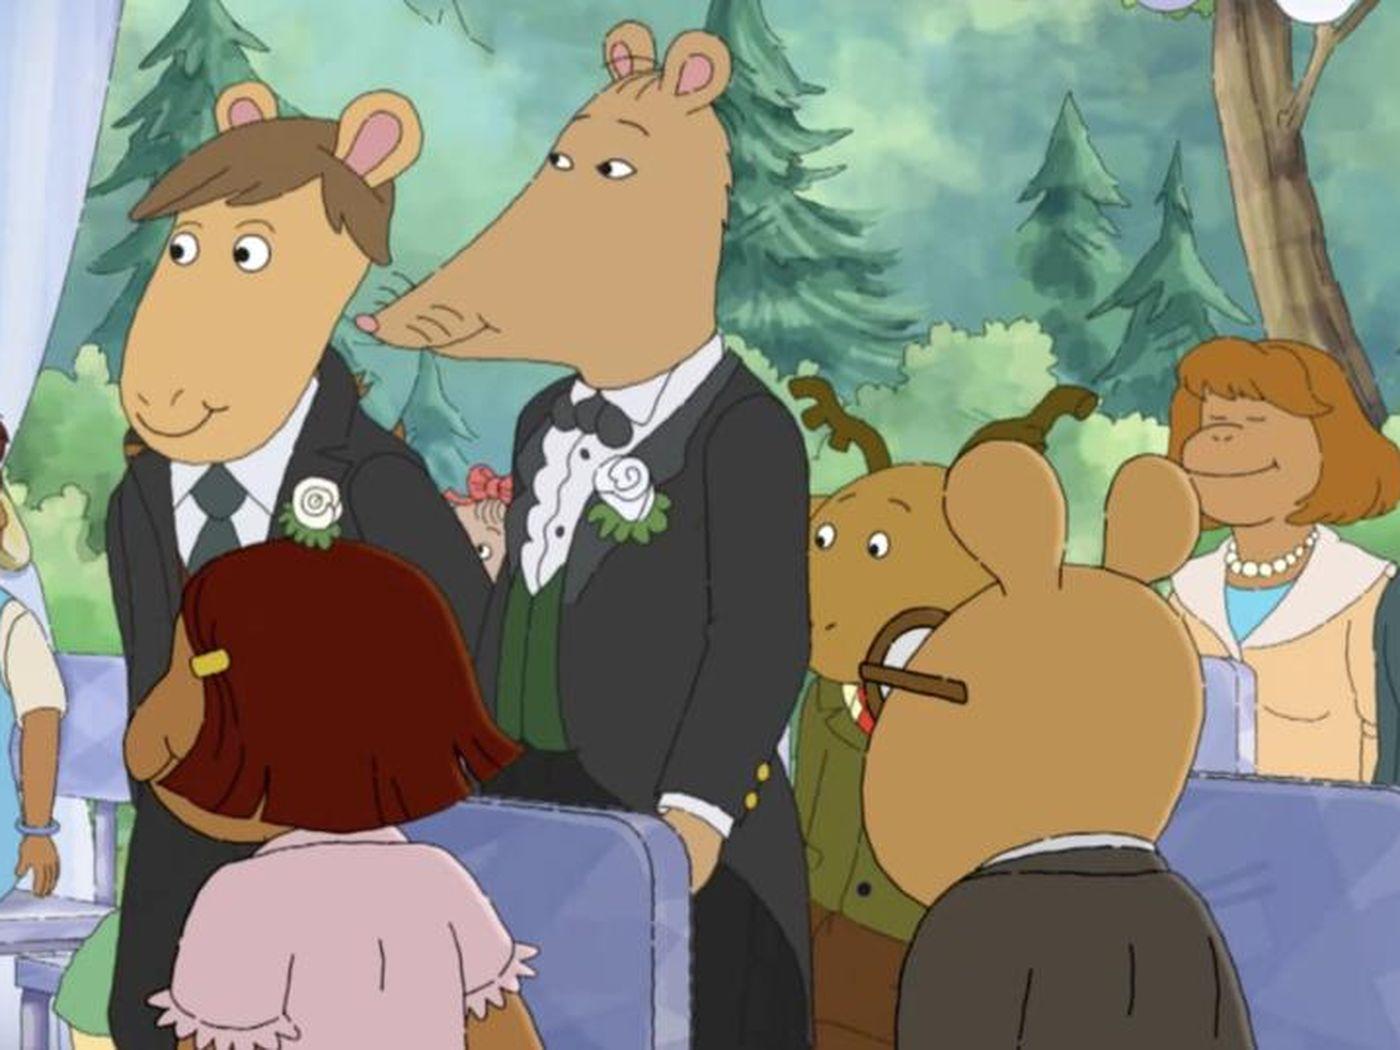 Kids' TV rarely shows gay marriage, but PBS's Arthur did